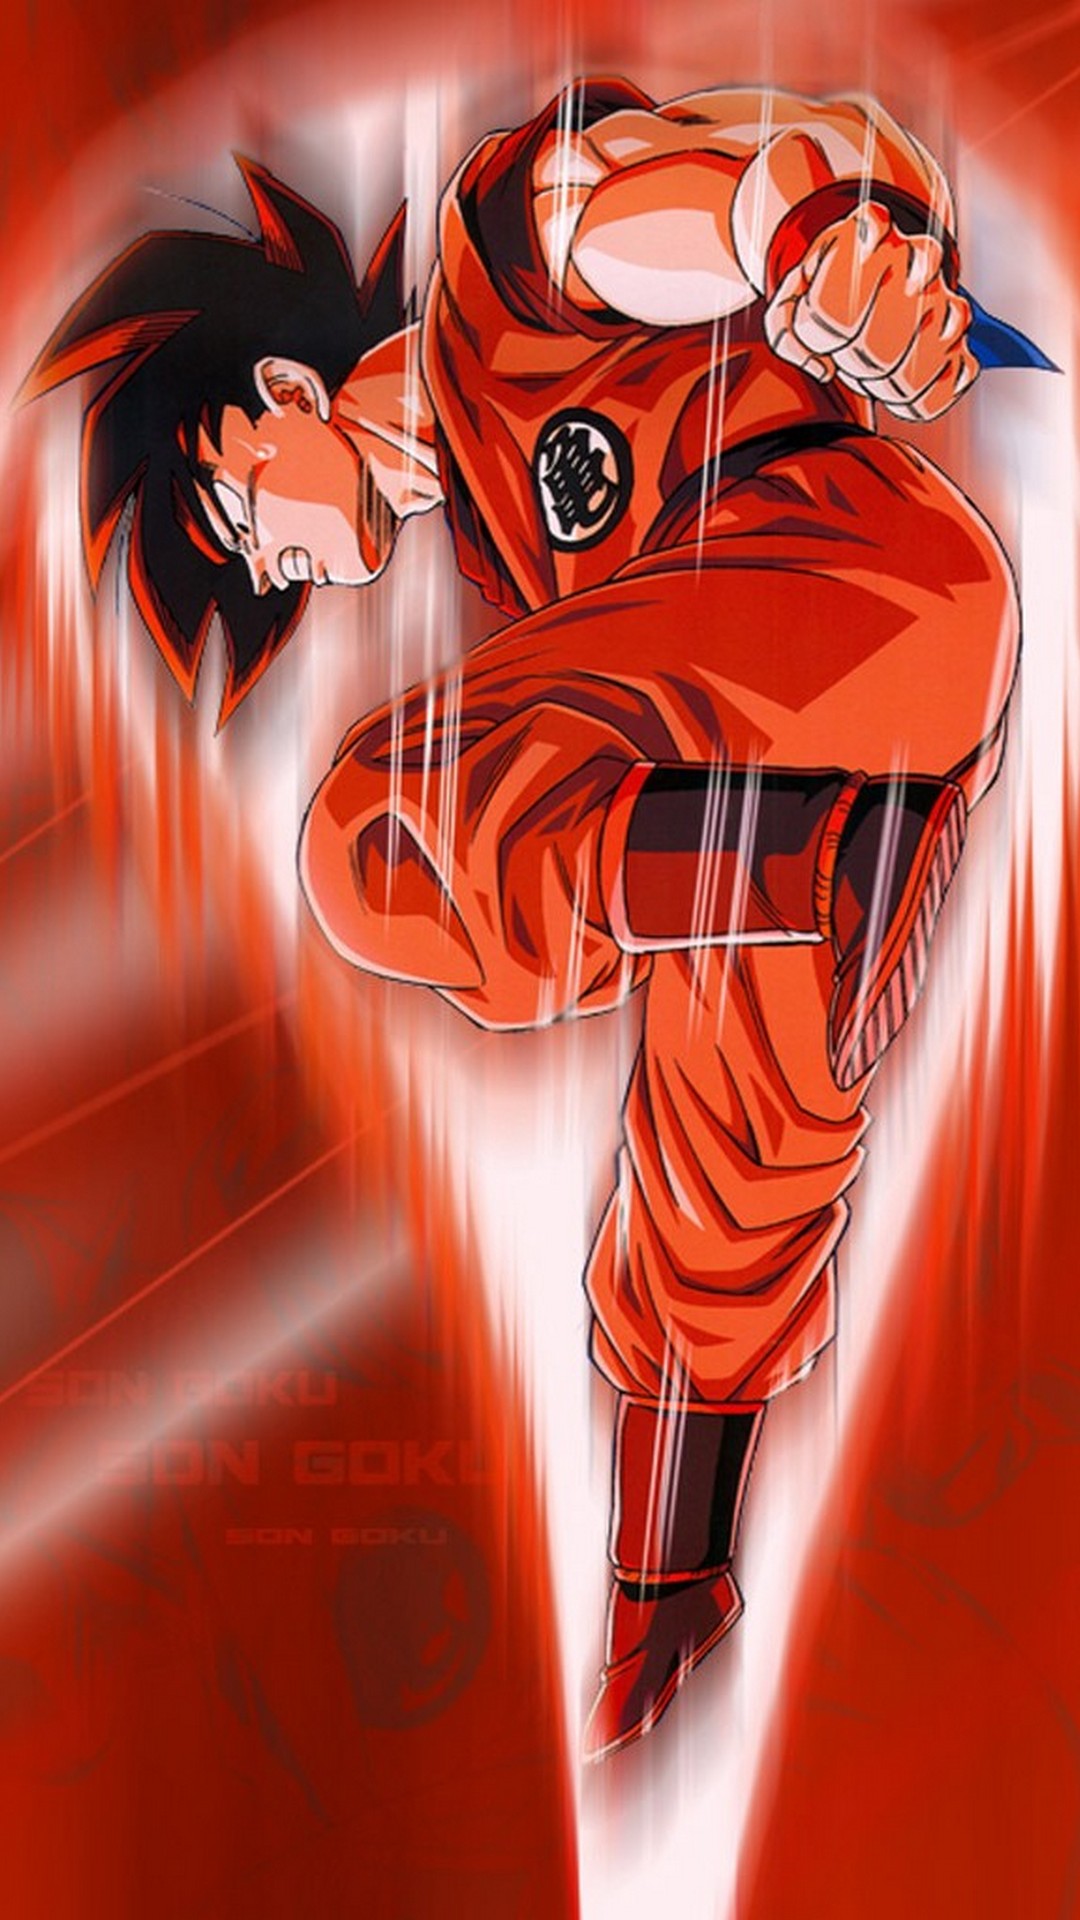 Goku Backgrounds For Android with HD resolution 1080x1920